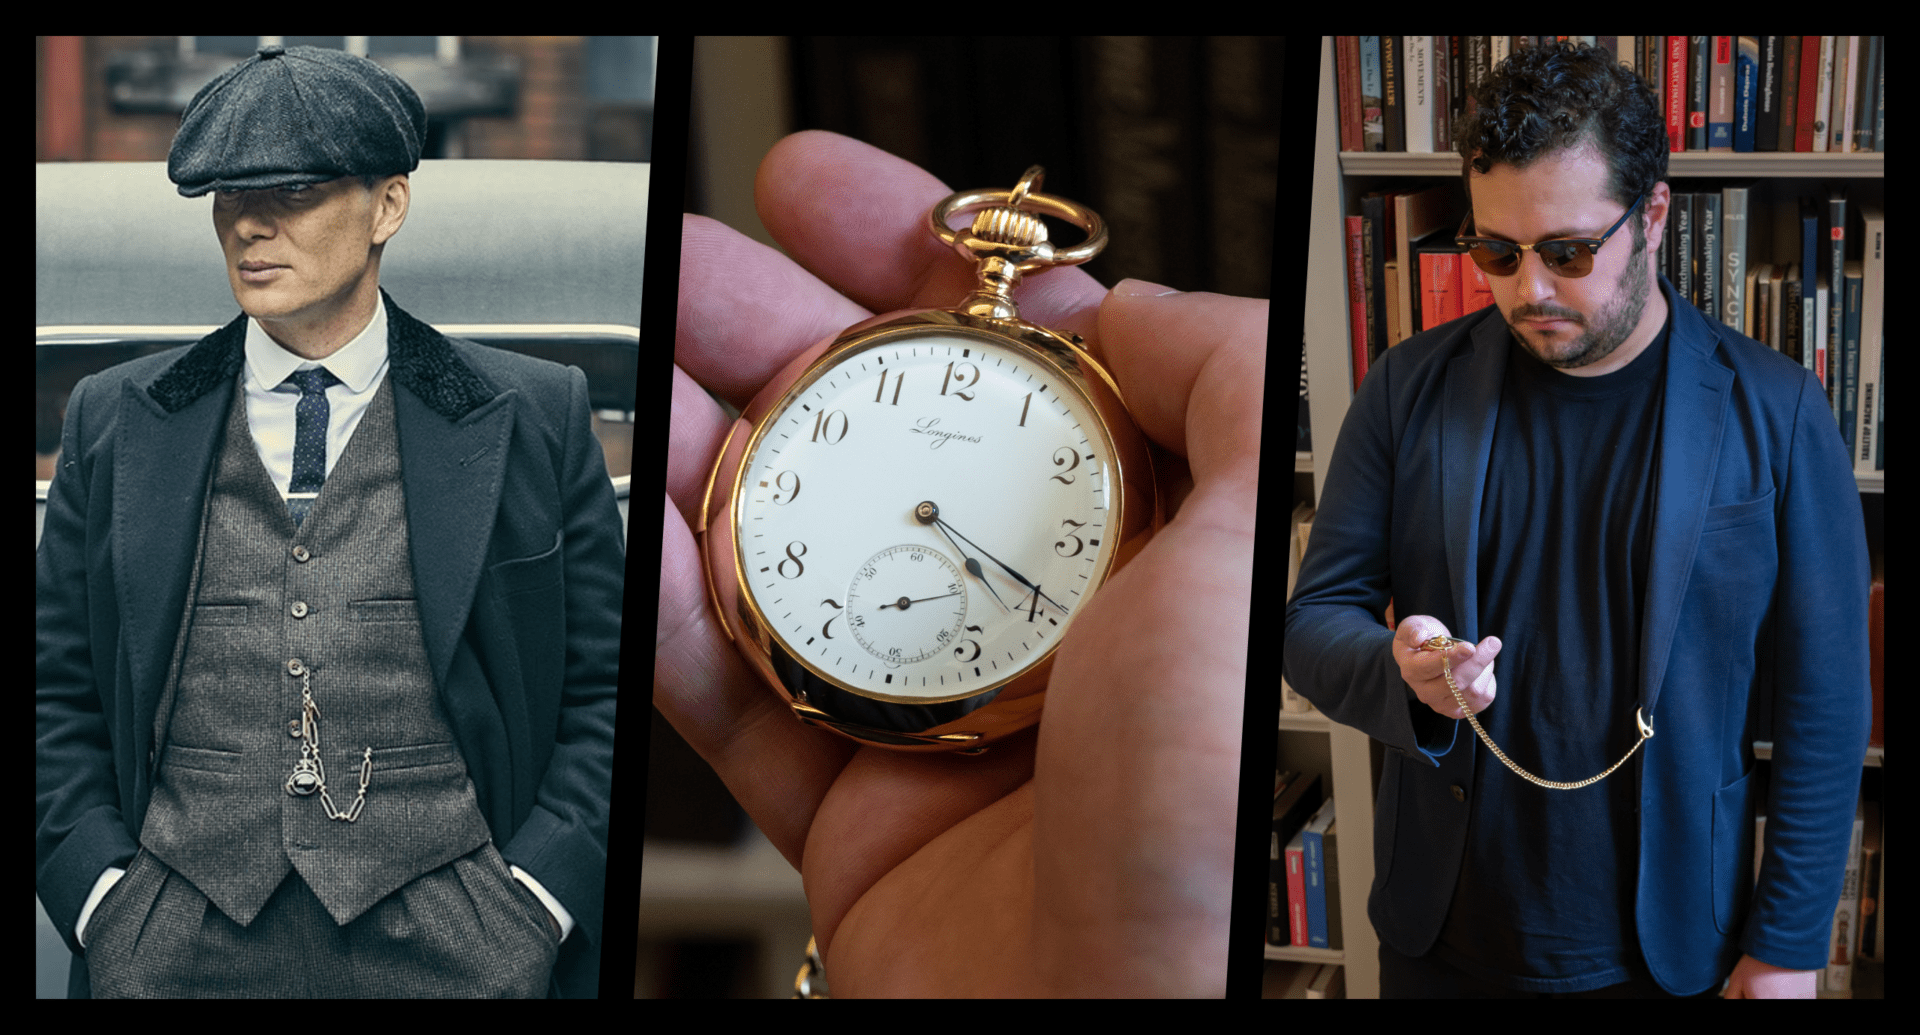 What is it really like to wear a pocket watch in the 21st century?